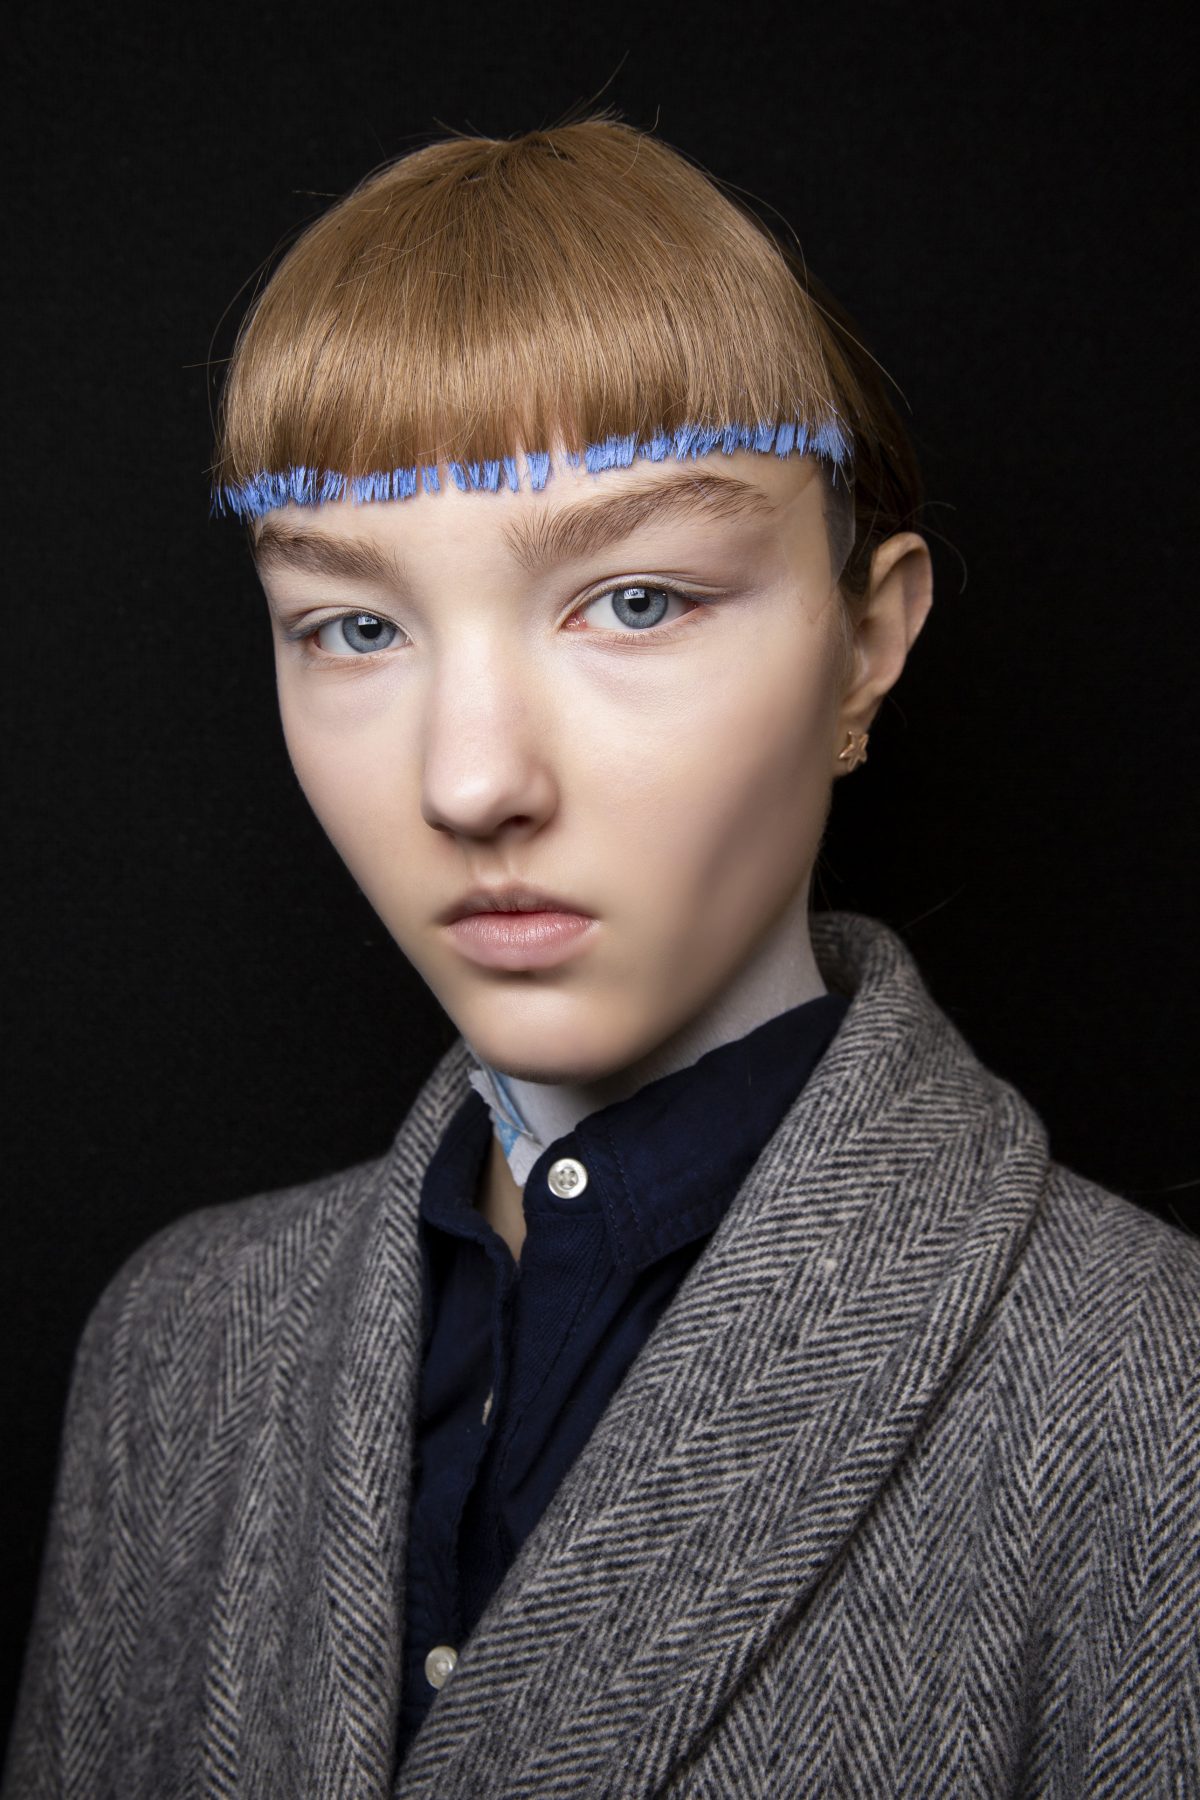 Micro Bangs: How to Get the Look